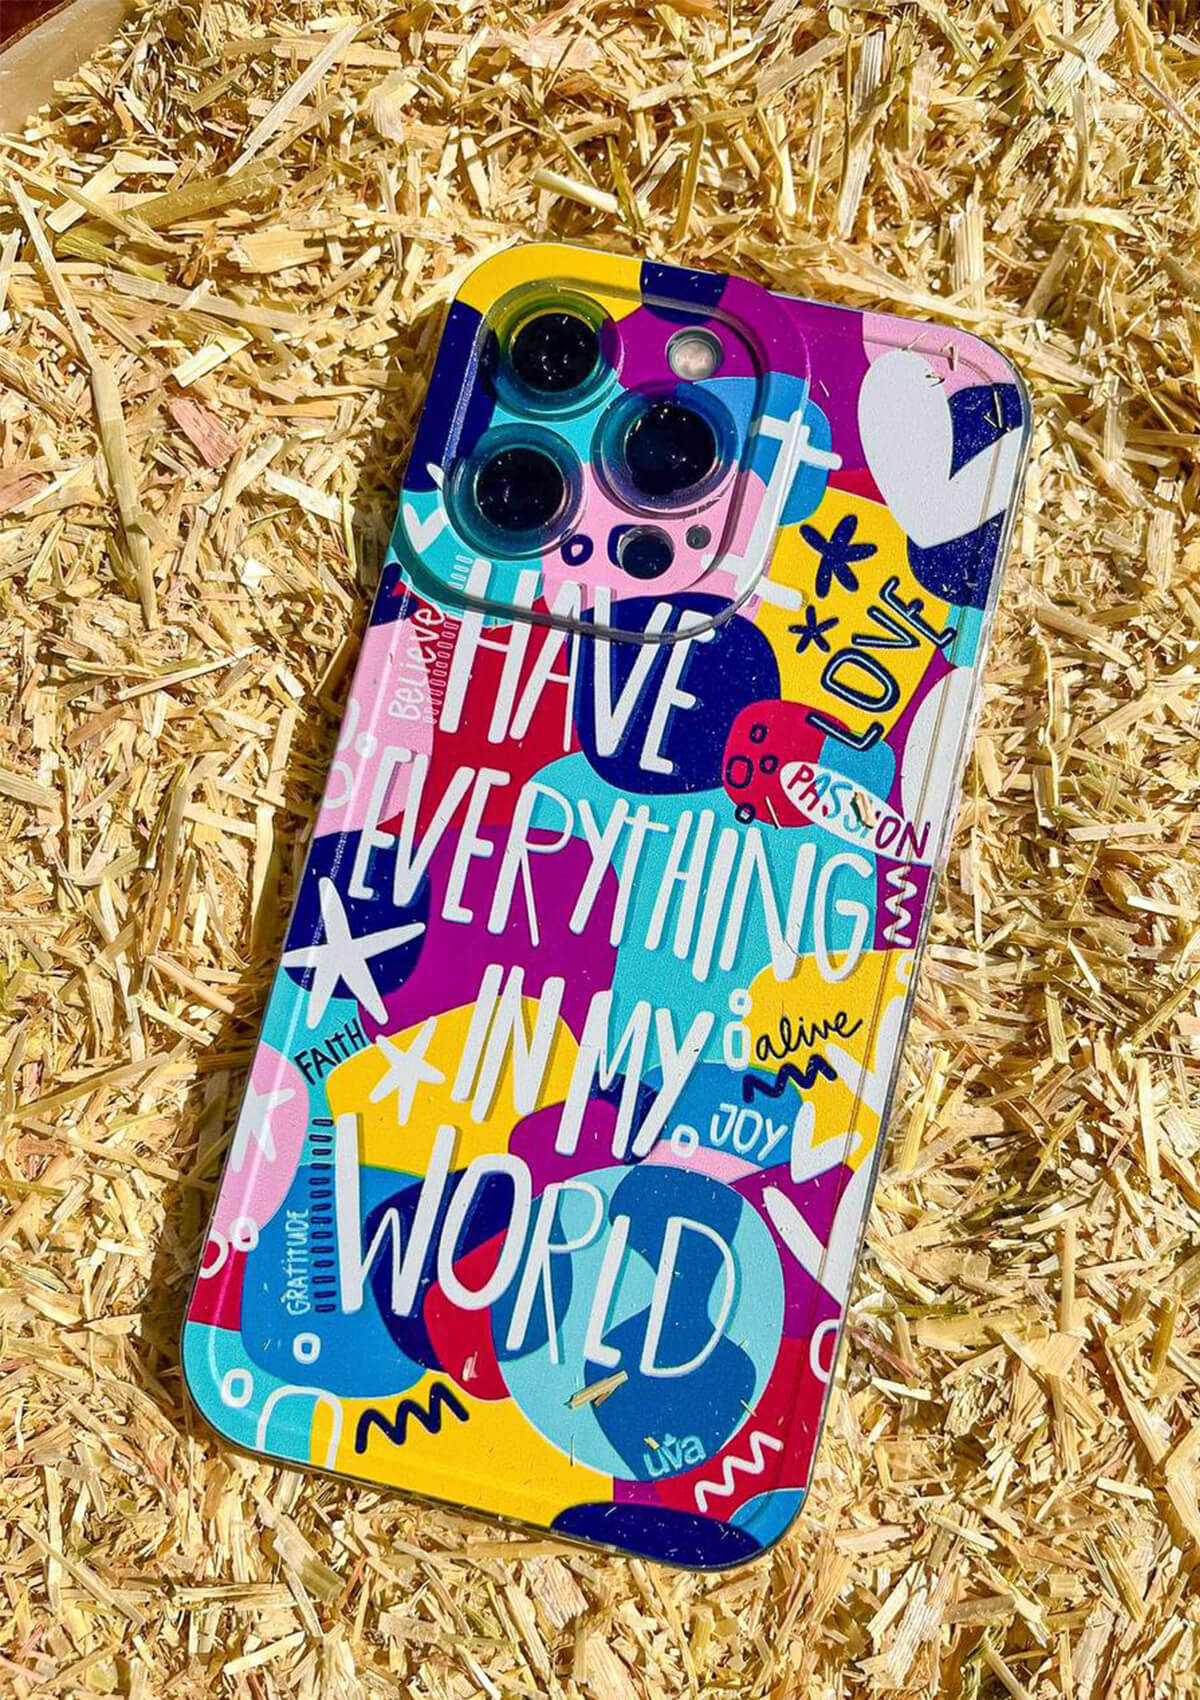 IPHONE CASE - I HAVE EVERYTHING IN MY WORLD